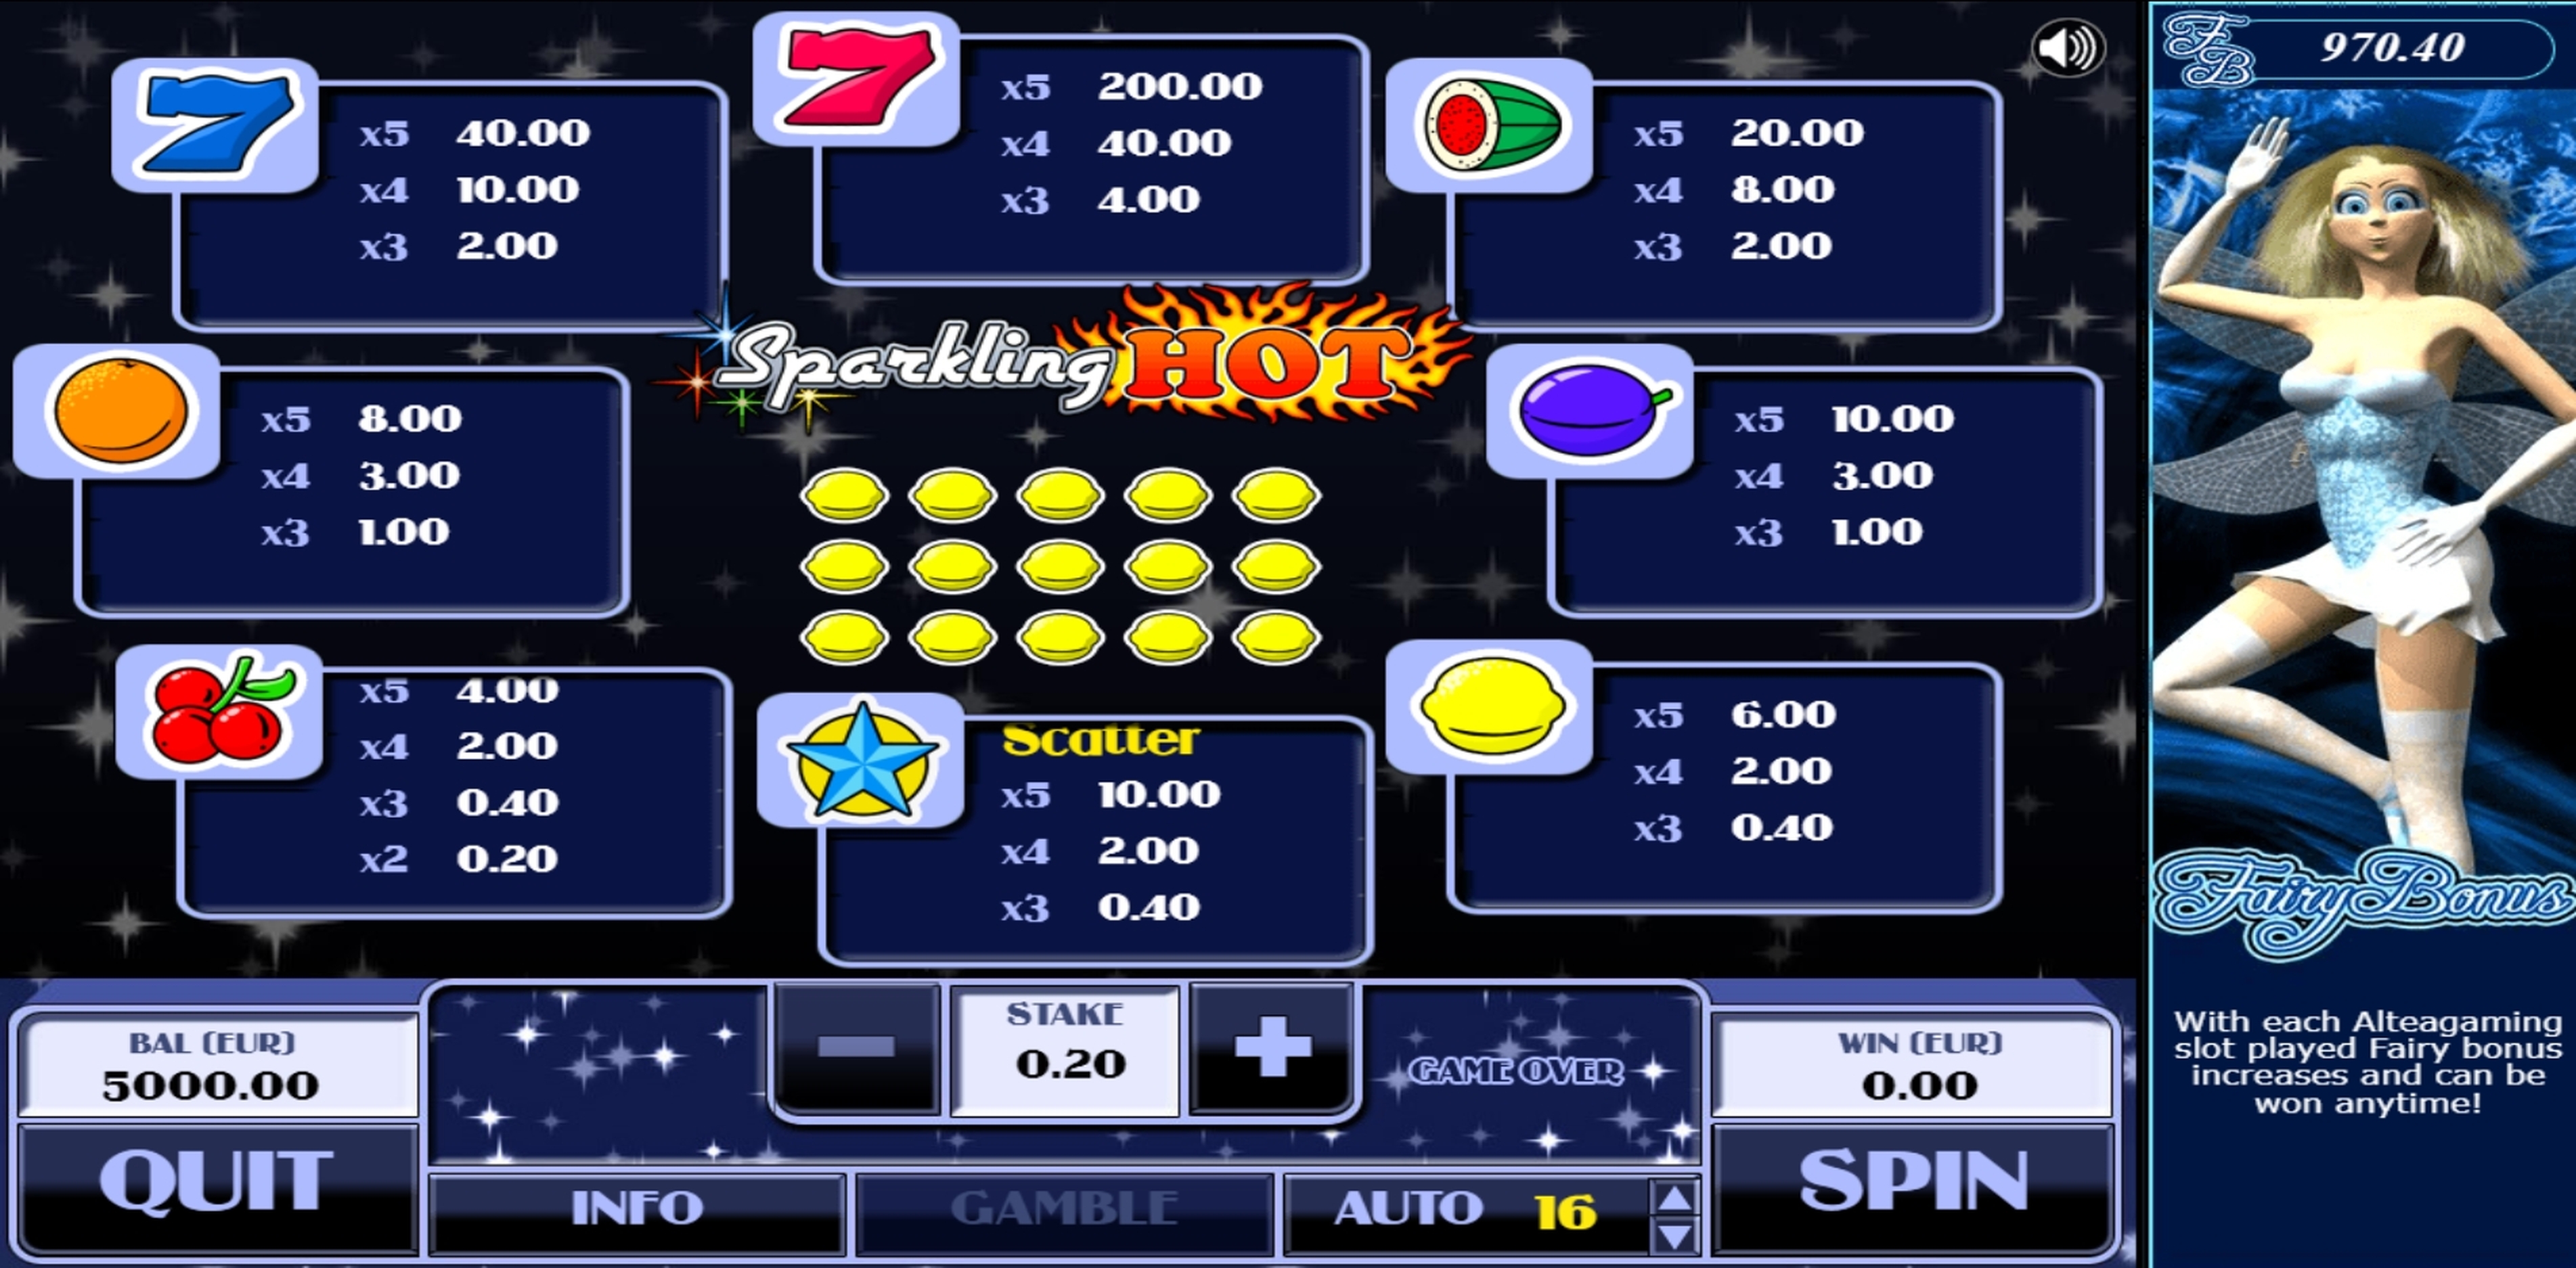 Info of Sparkling Hot Slot Game by AlteaGaming